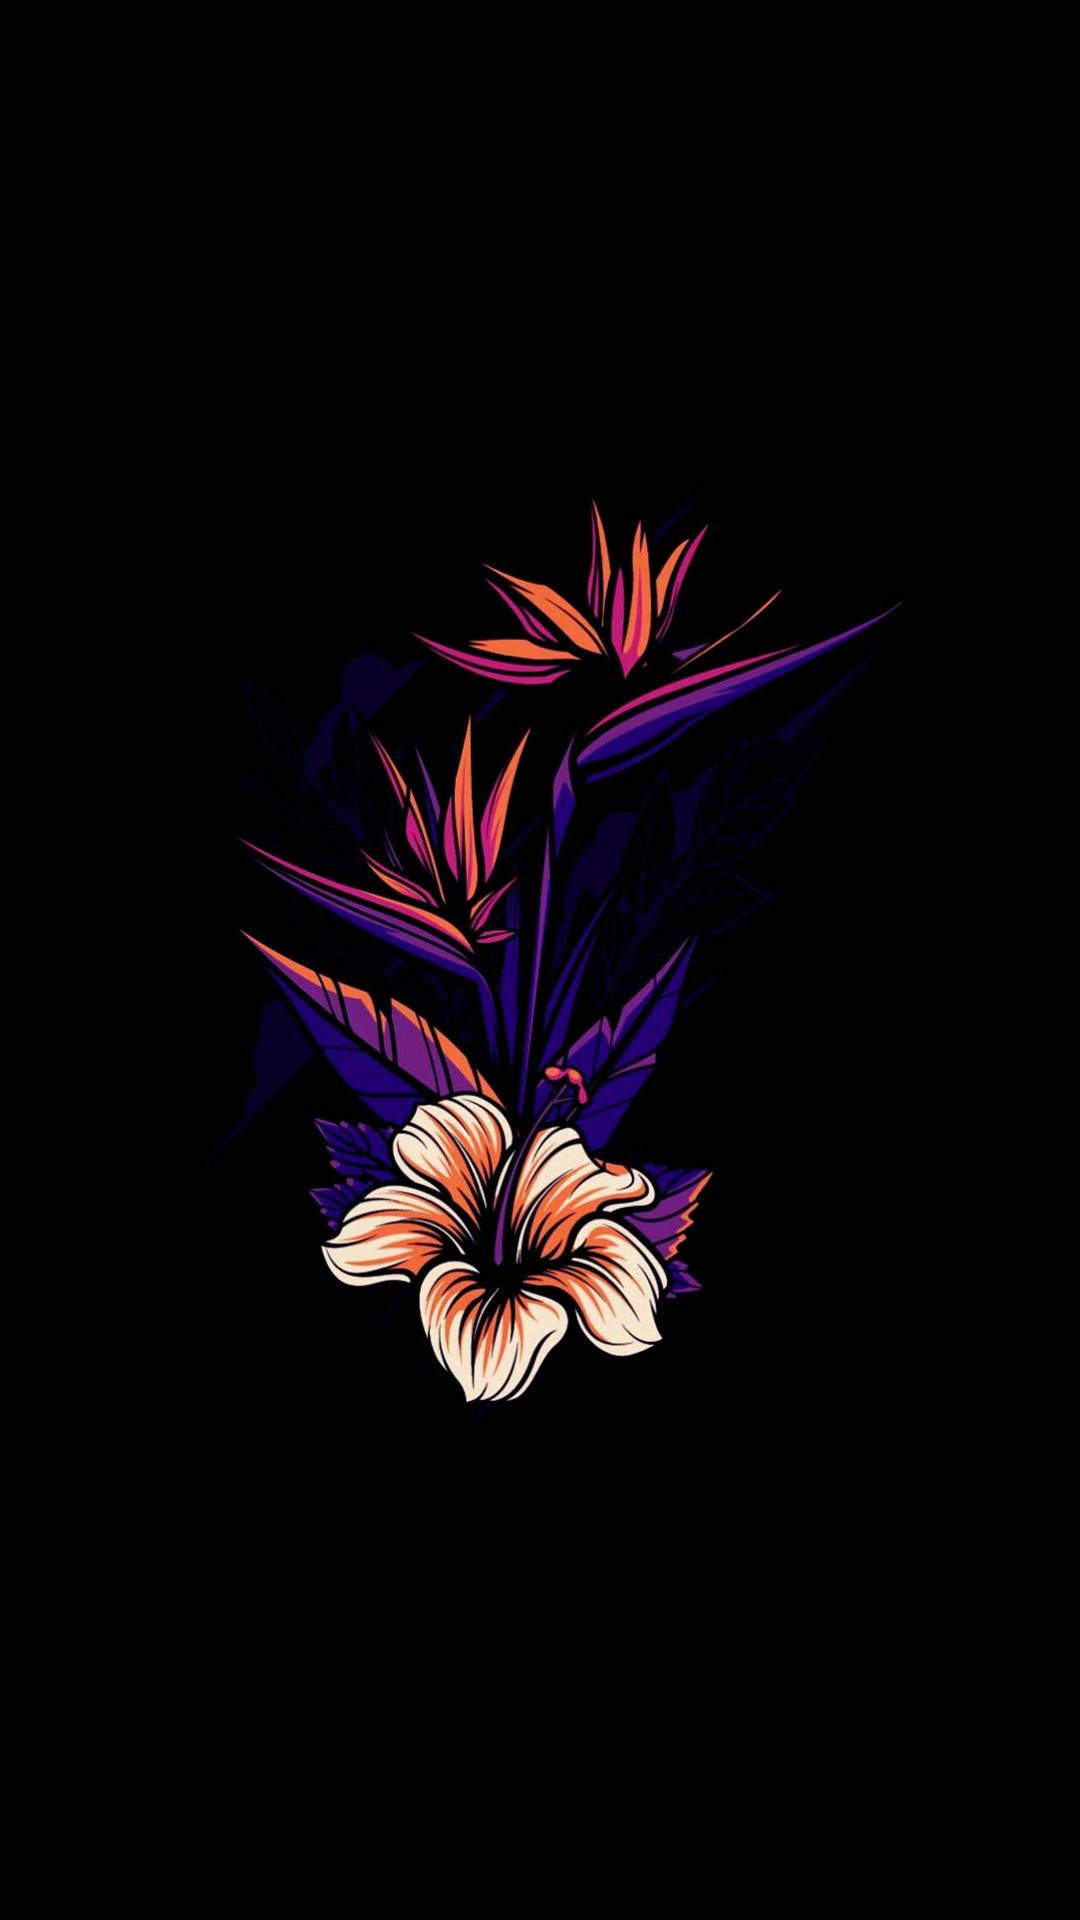 Flower With Leaves Graphic For Phone Background